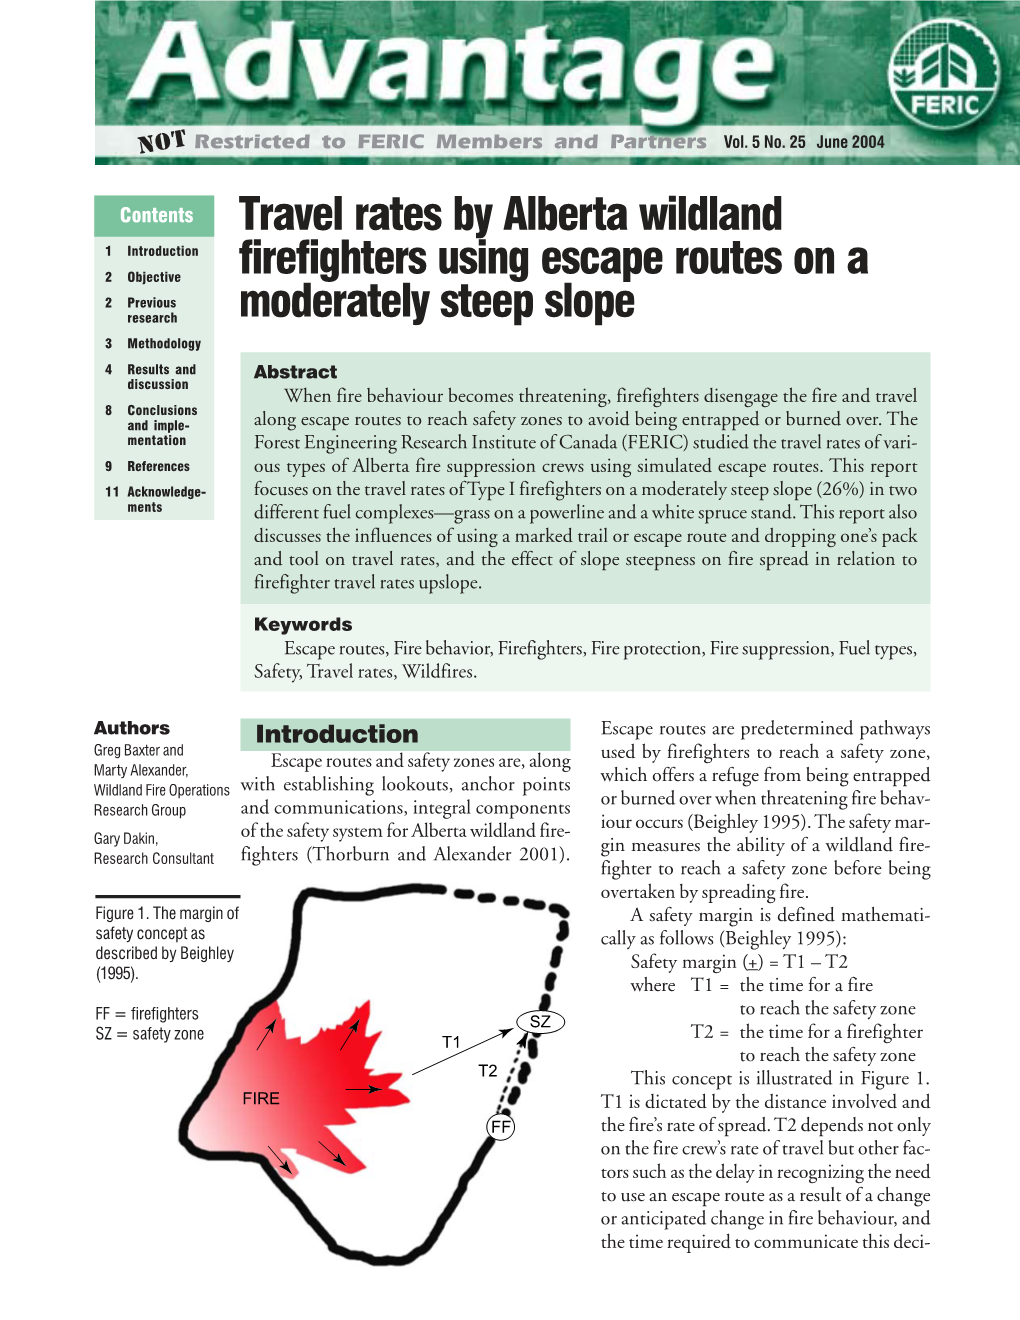 Travel Rates by Alberta Wildland Firefighters Using Escape Routes On